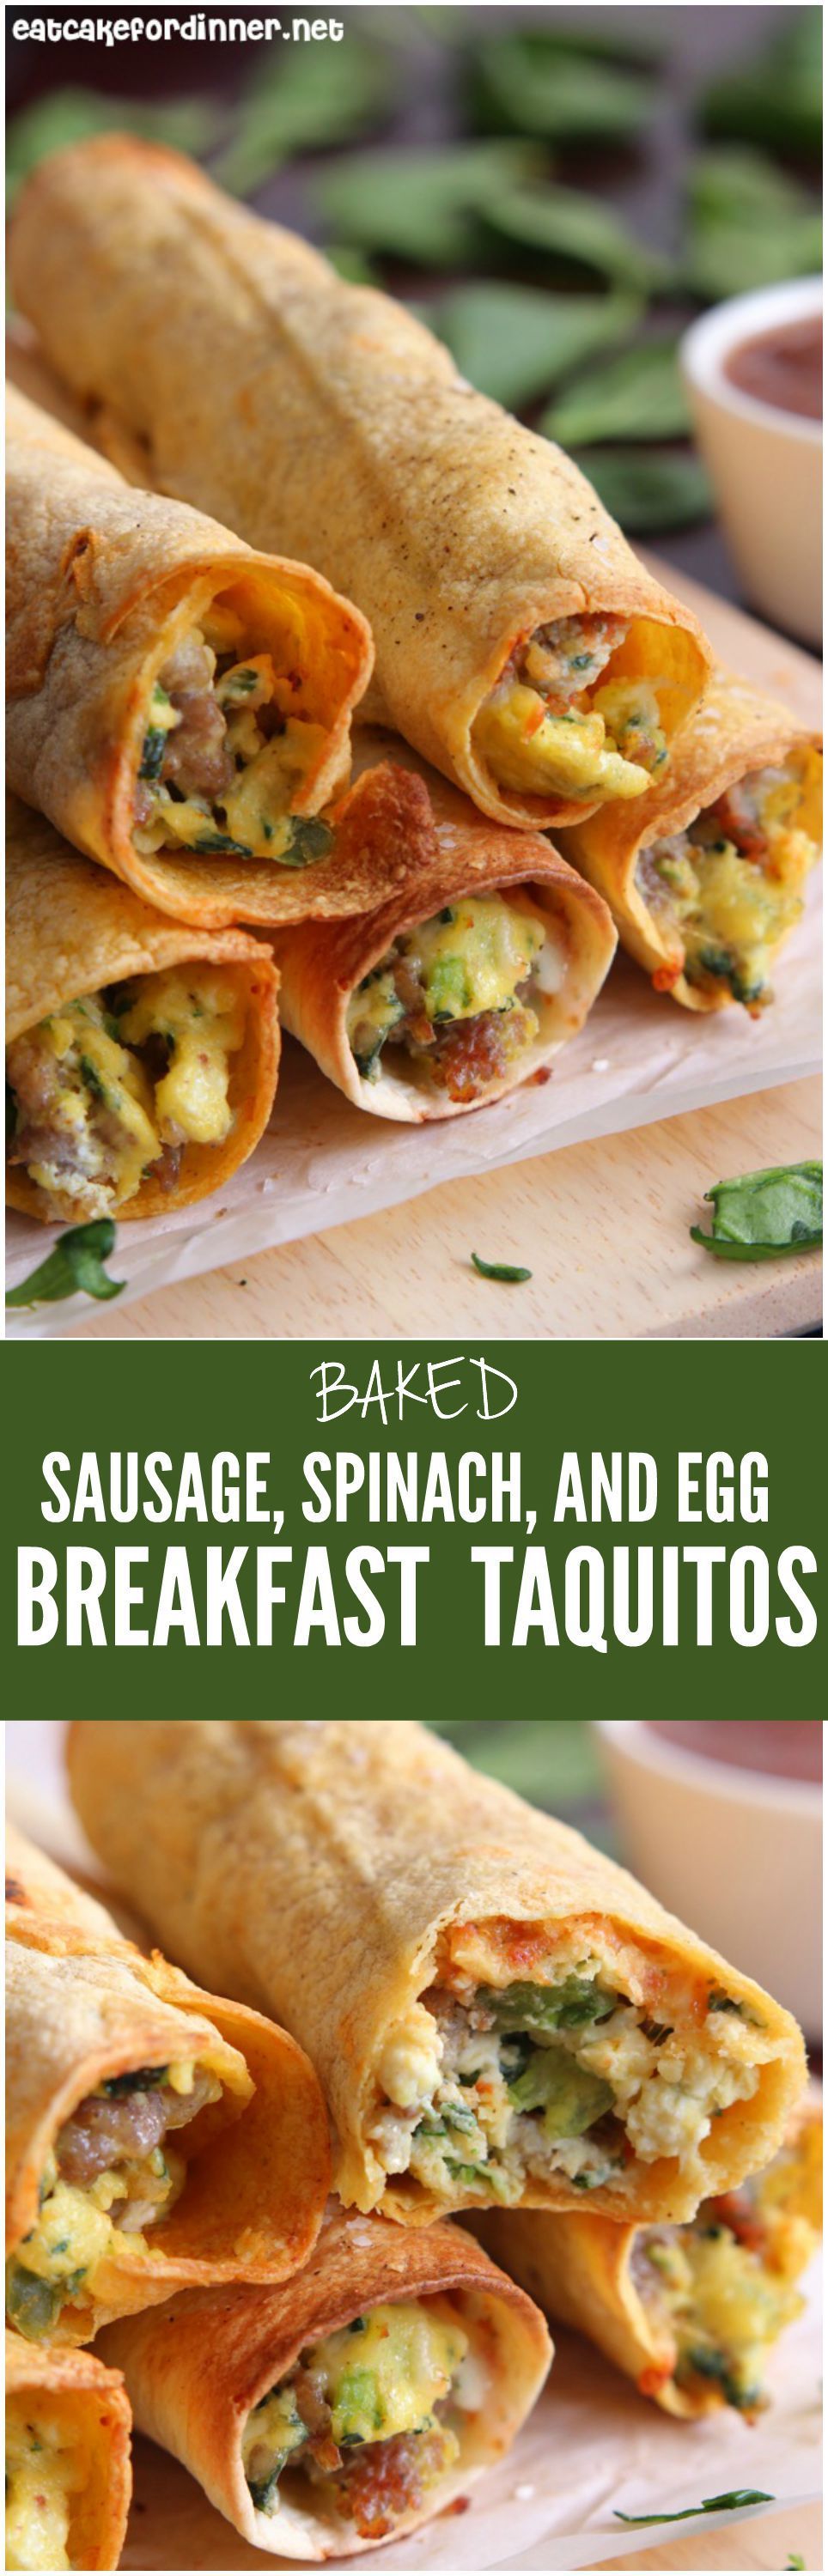 These Sausage, Spinach, and Egg Breakfast Burritos make such a delicious breakfast!